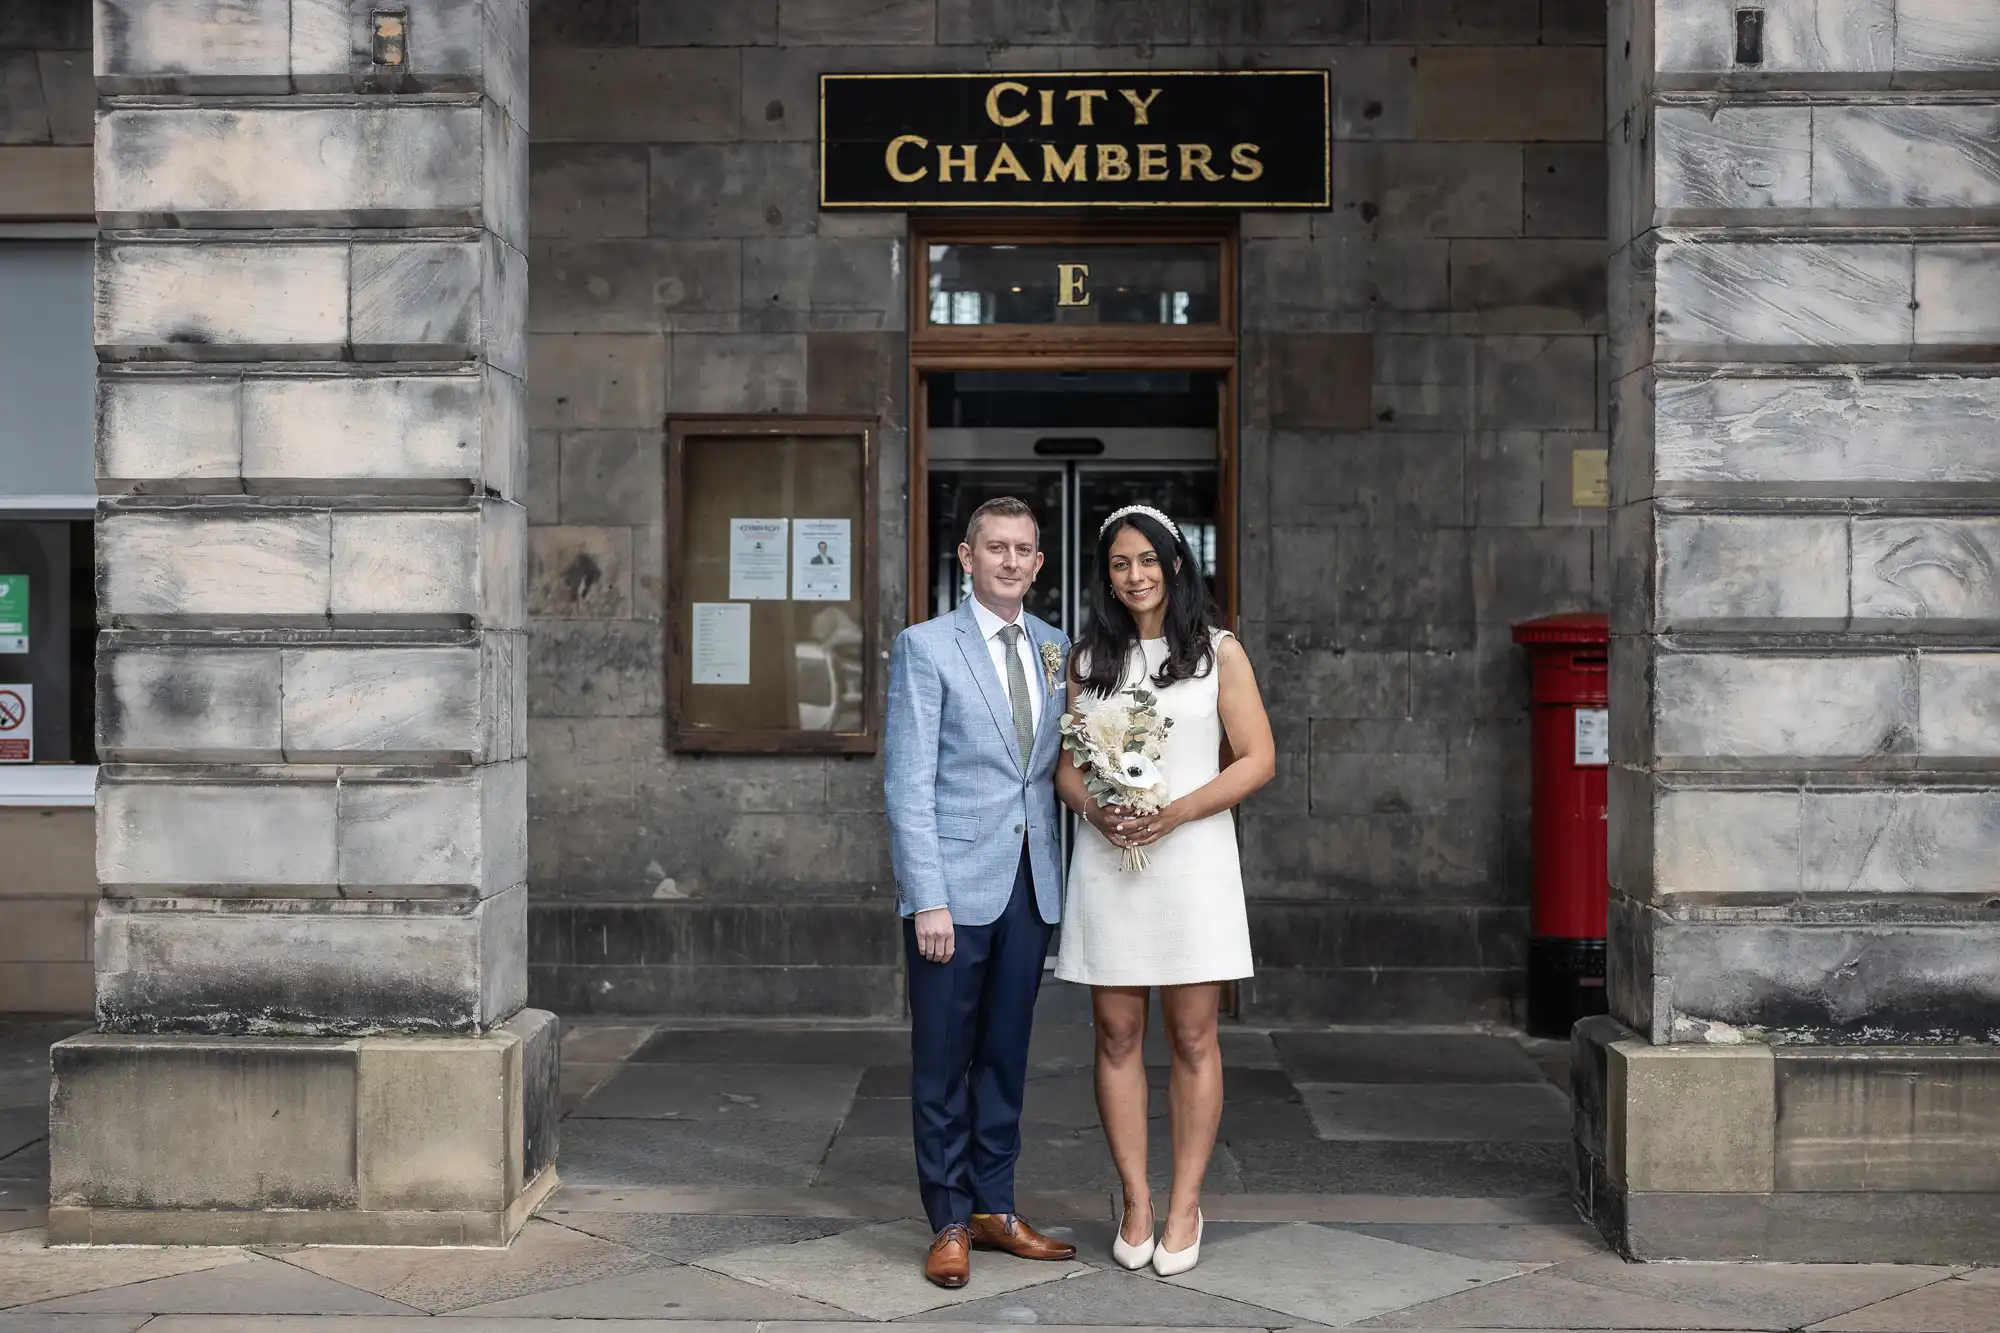 wedding photographer Edinburgh City Chambers - newlywed couple stands in front of a building with a "City Chambers" sign. The man wears a light blue blazer and the woman wears a white dress, holding a bouquet of flowers.